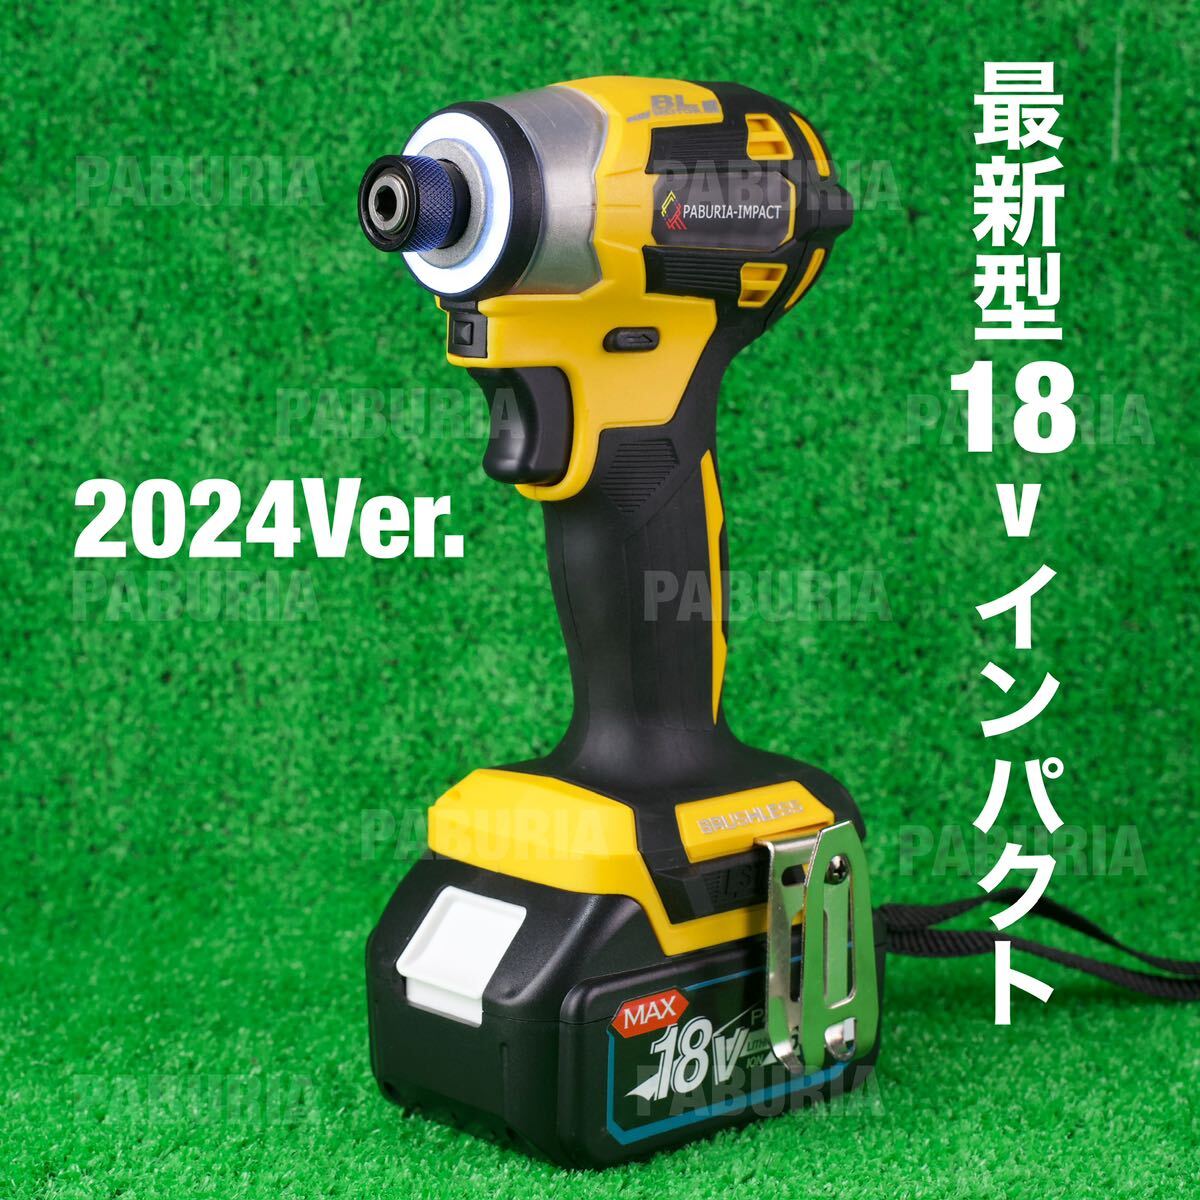 [2024 new model model ]173 newest PABURIA new model BL model Makita 18v interchangeable impact driver yellow color [ receipt issue possibility ]